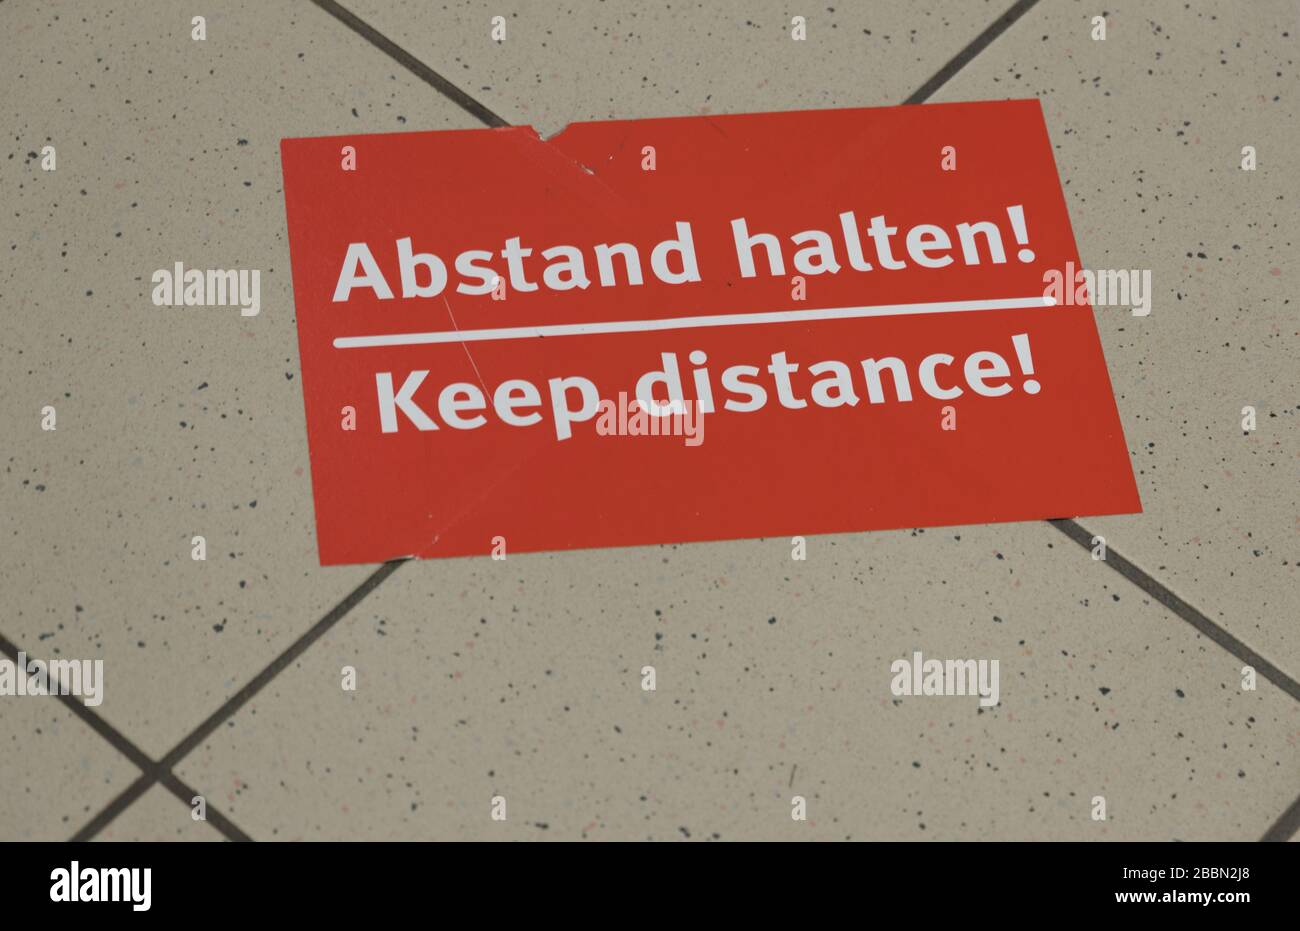 information sign: Keep distance and the german translation: Abstand halten Stock Photo